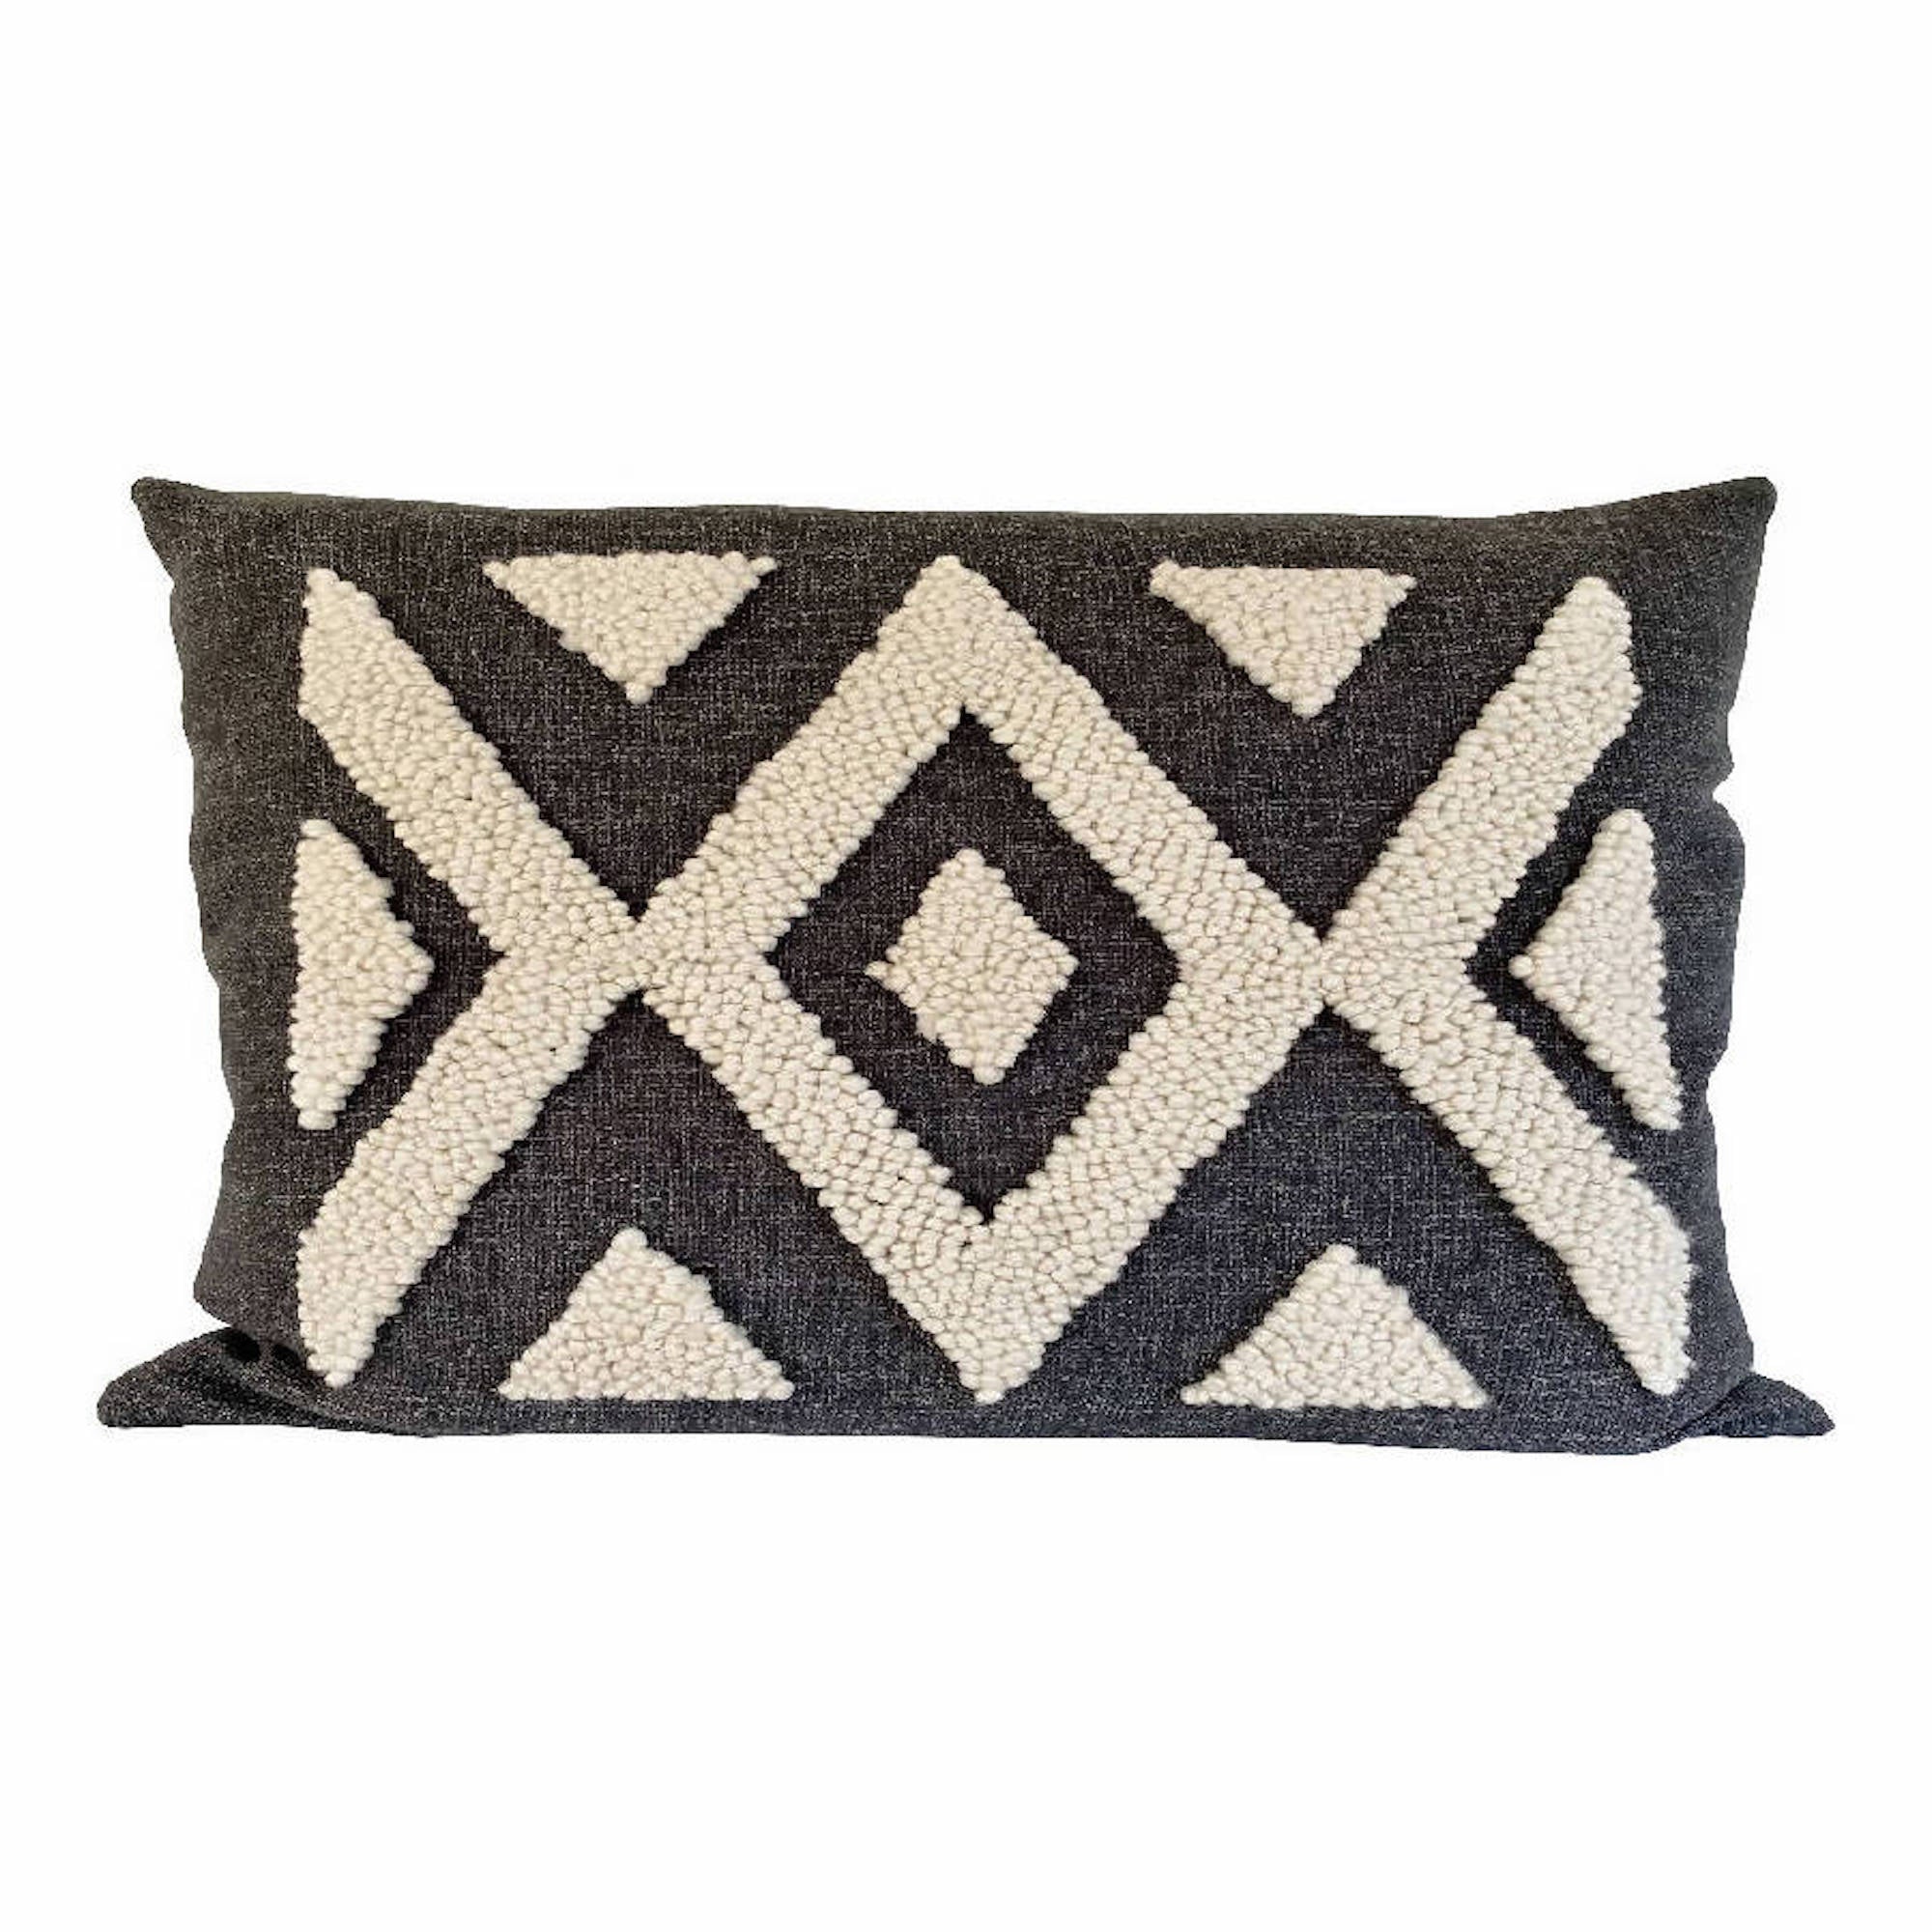 Punch Needle Ndebele Lumbar Pillow - Pattern 2 - Natural on Charcoal